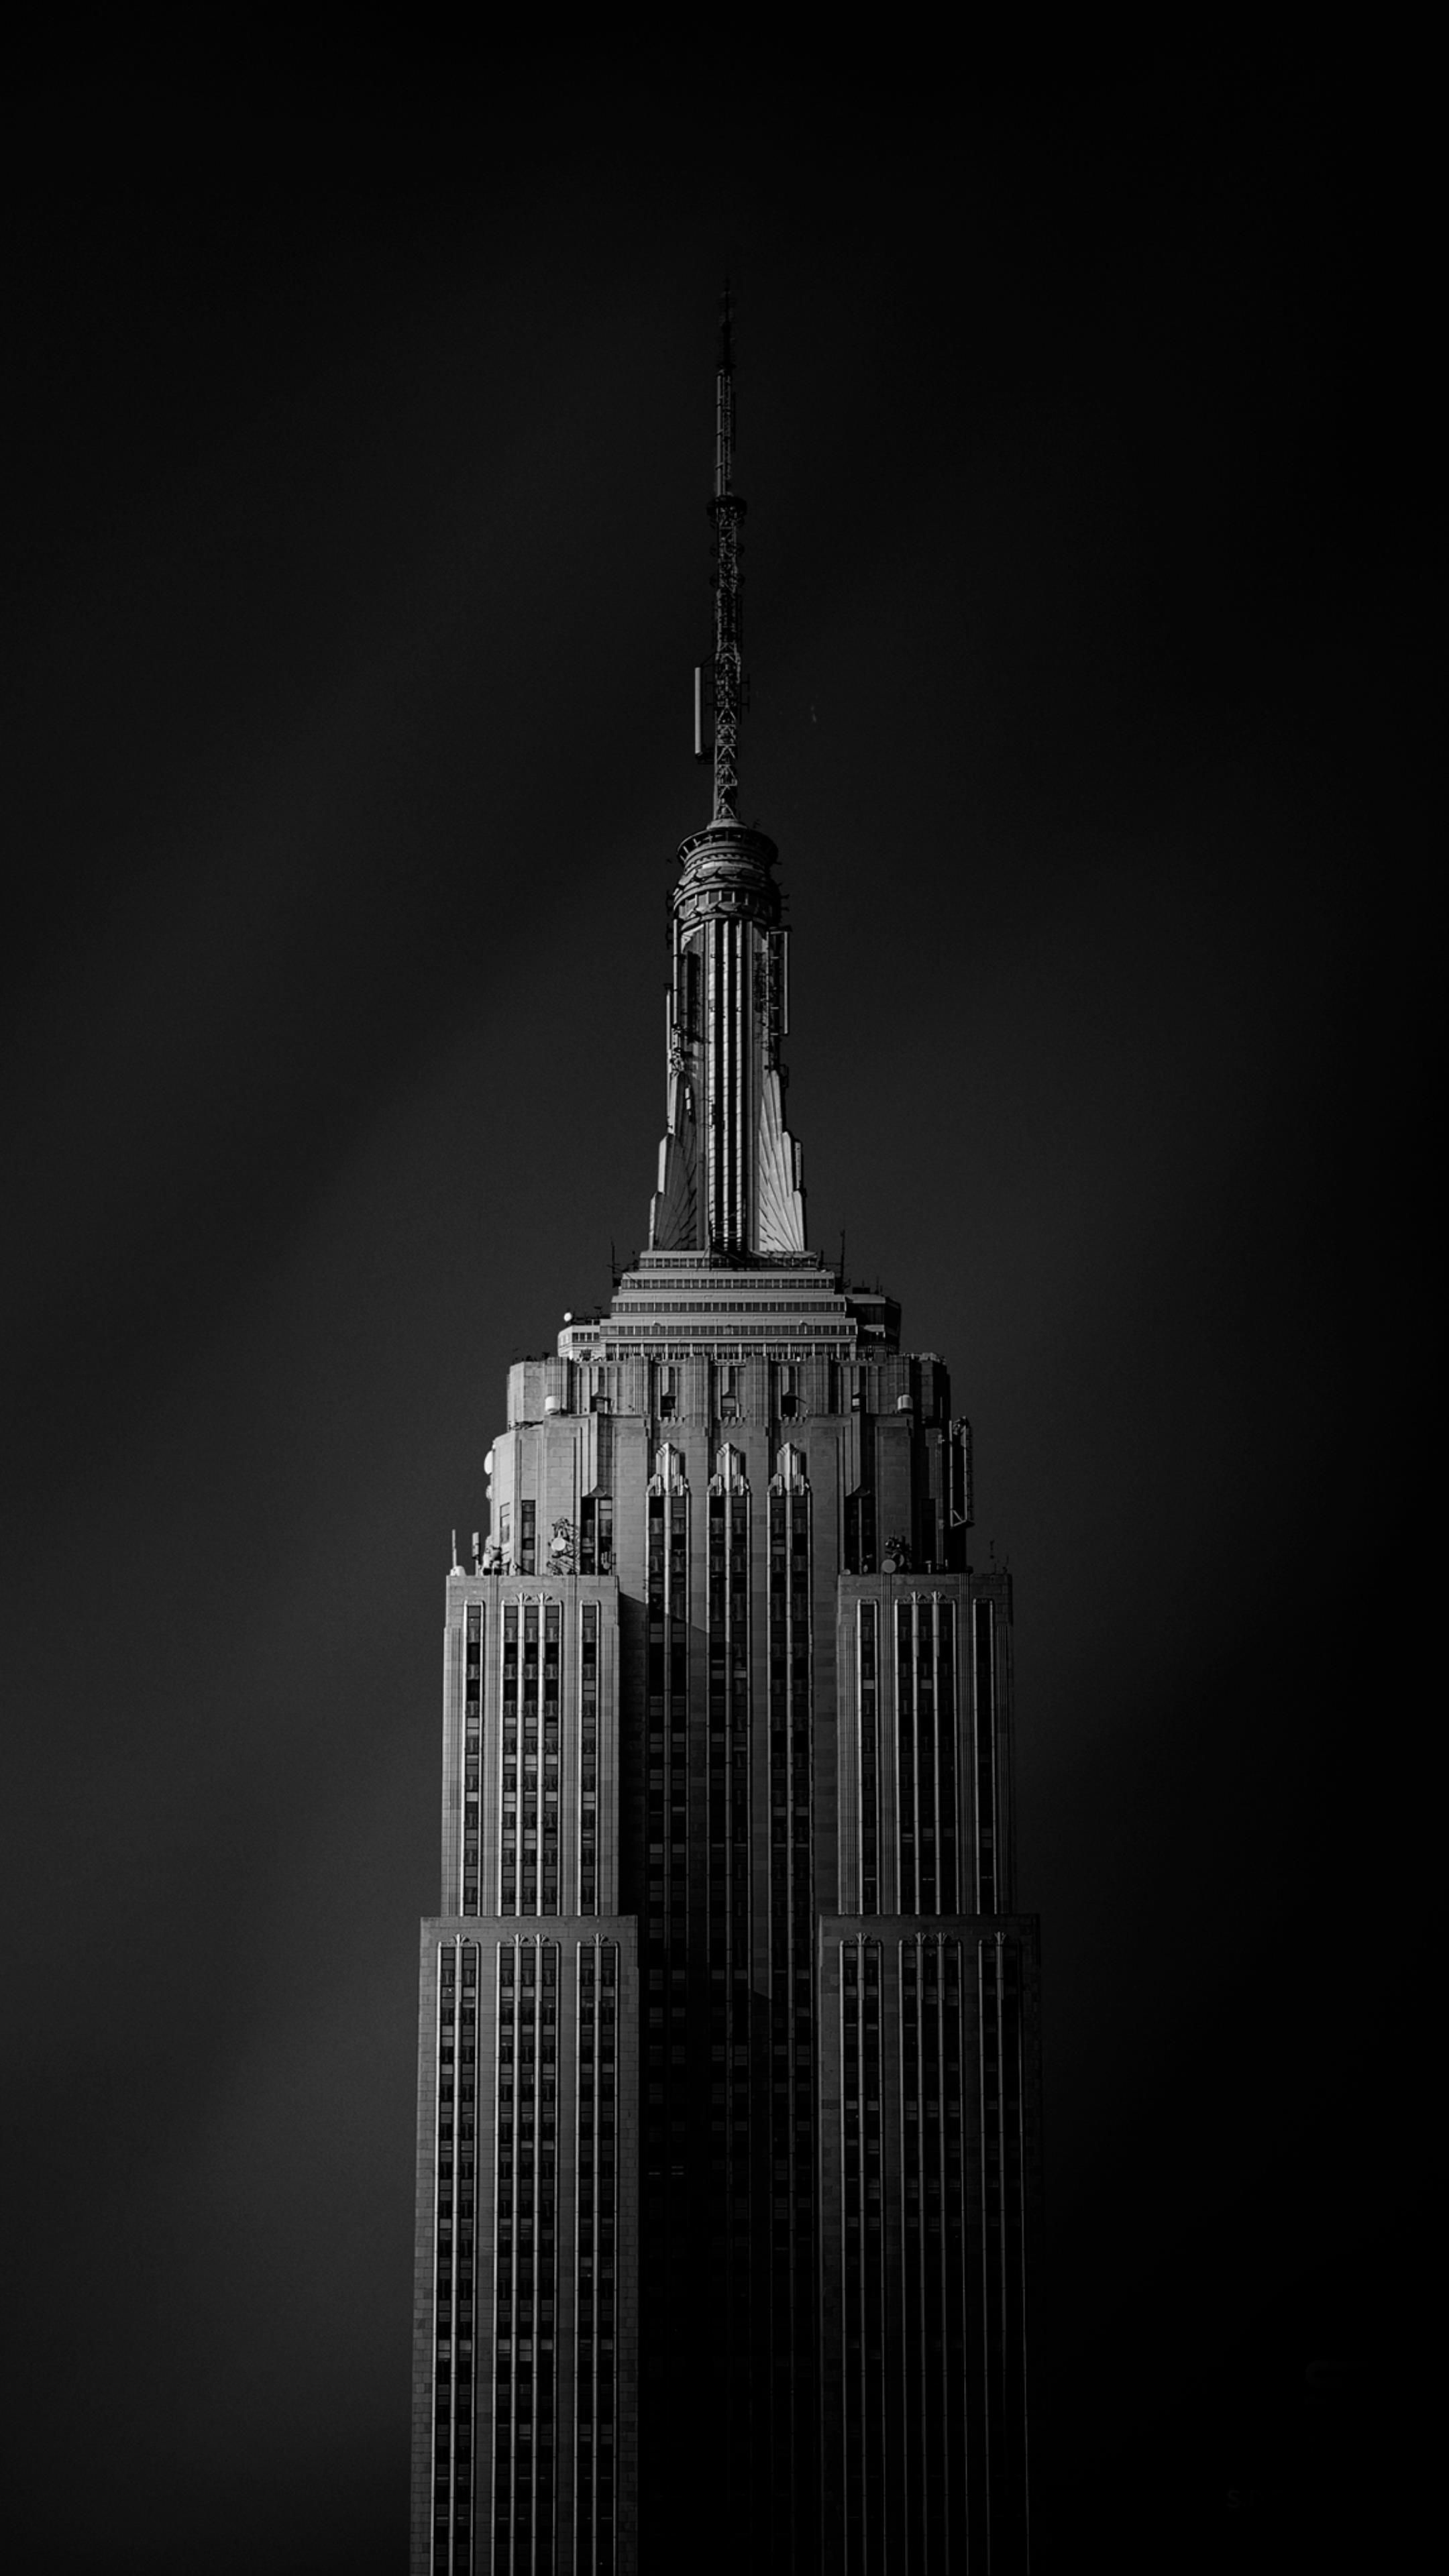 Amoled architecture wallpaper, Black and white picture, Urban beauty, Monochrome photography, 2160x3840 4K Handy